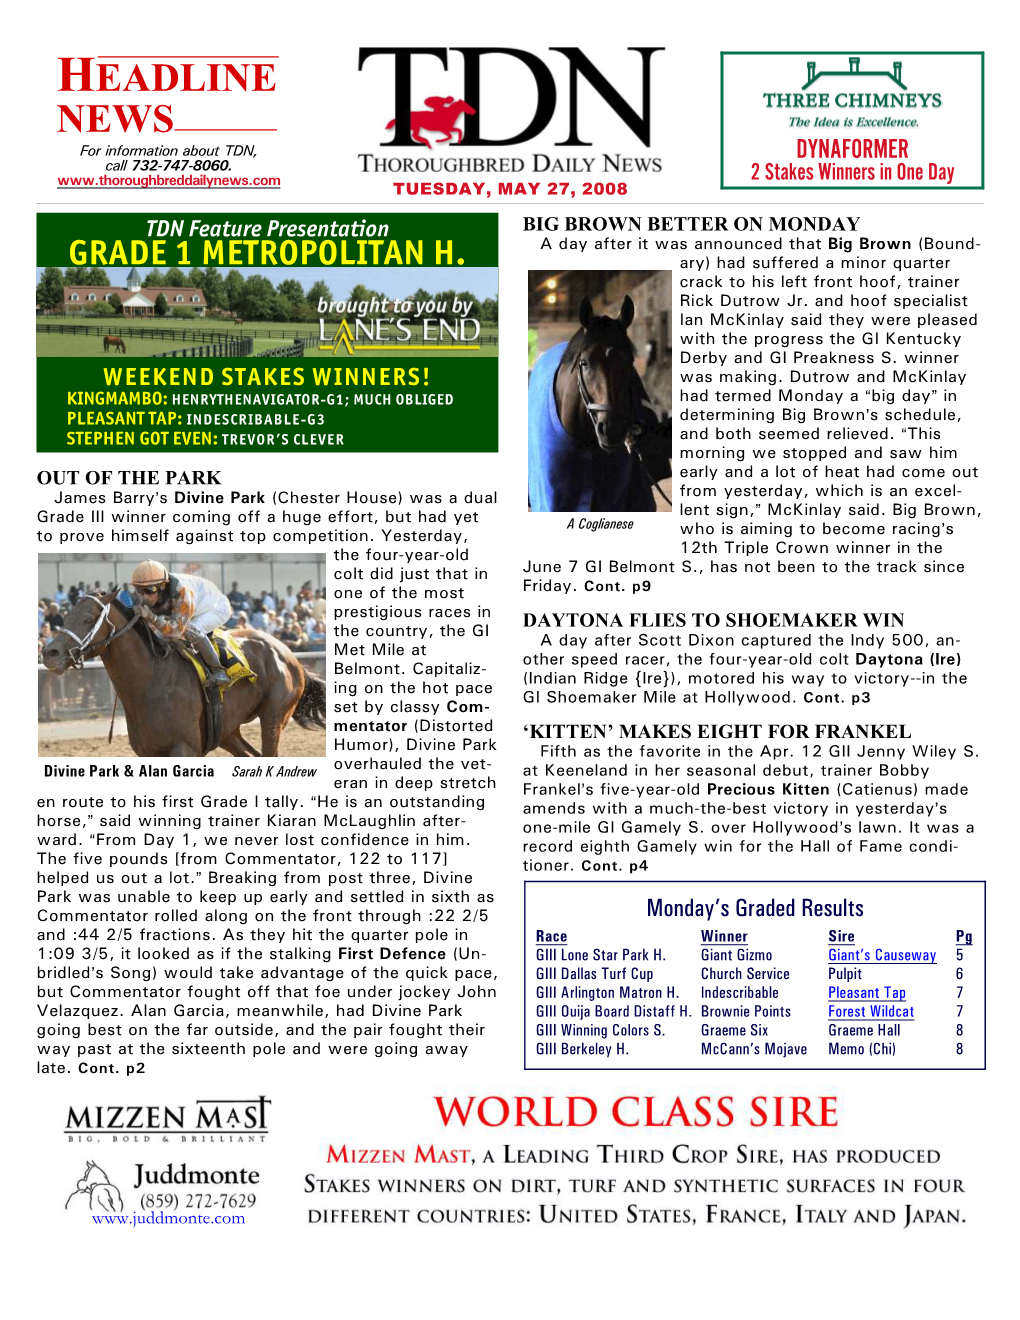 HEADLINE NEWS for Information About TDN, DYNAFORMER Call 732-747-8060